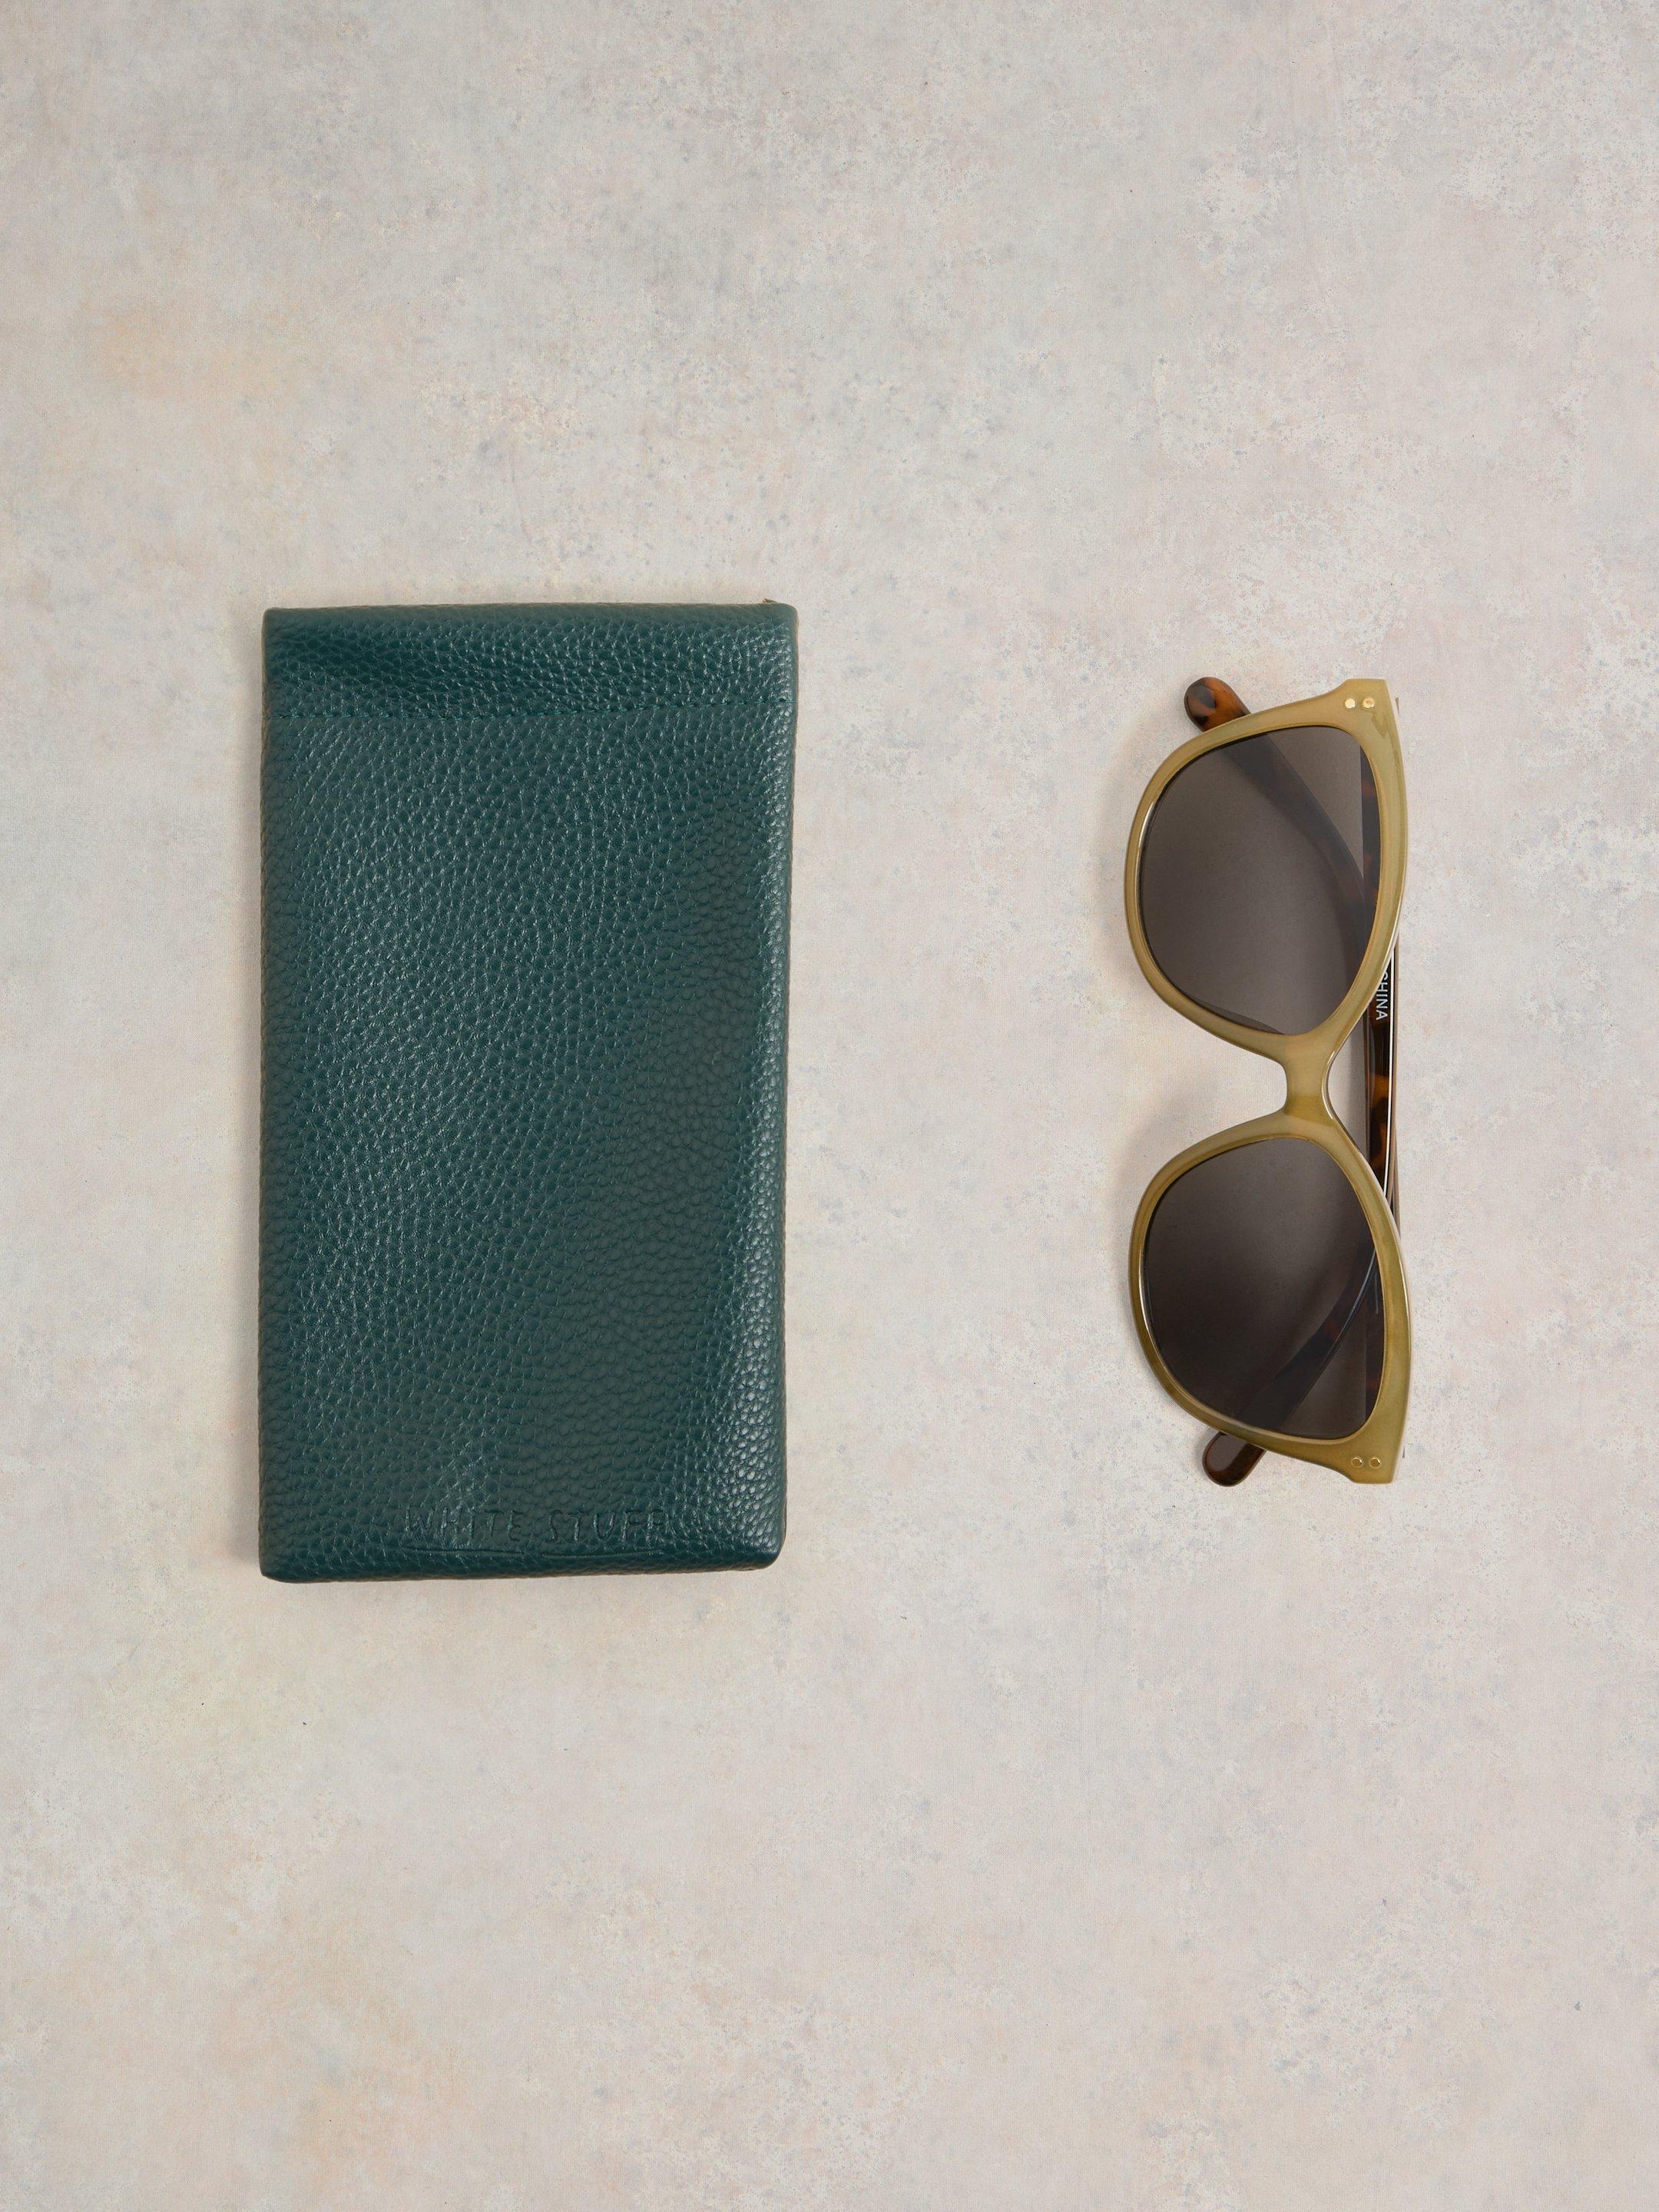 Sia Soft Cateye Sunglasses in DUS GREEN - FLAT FRONT